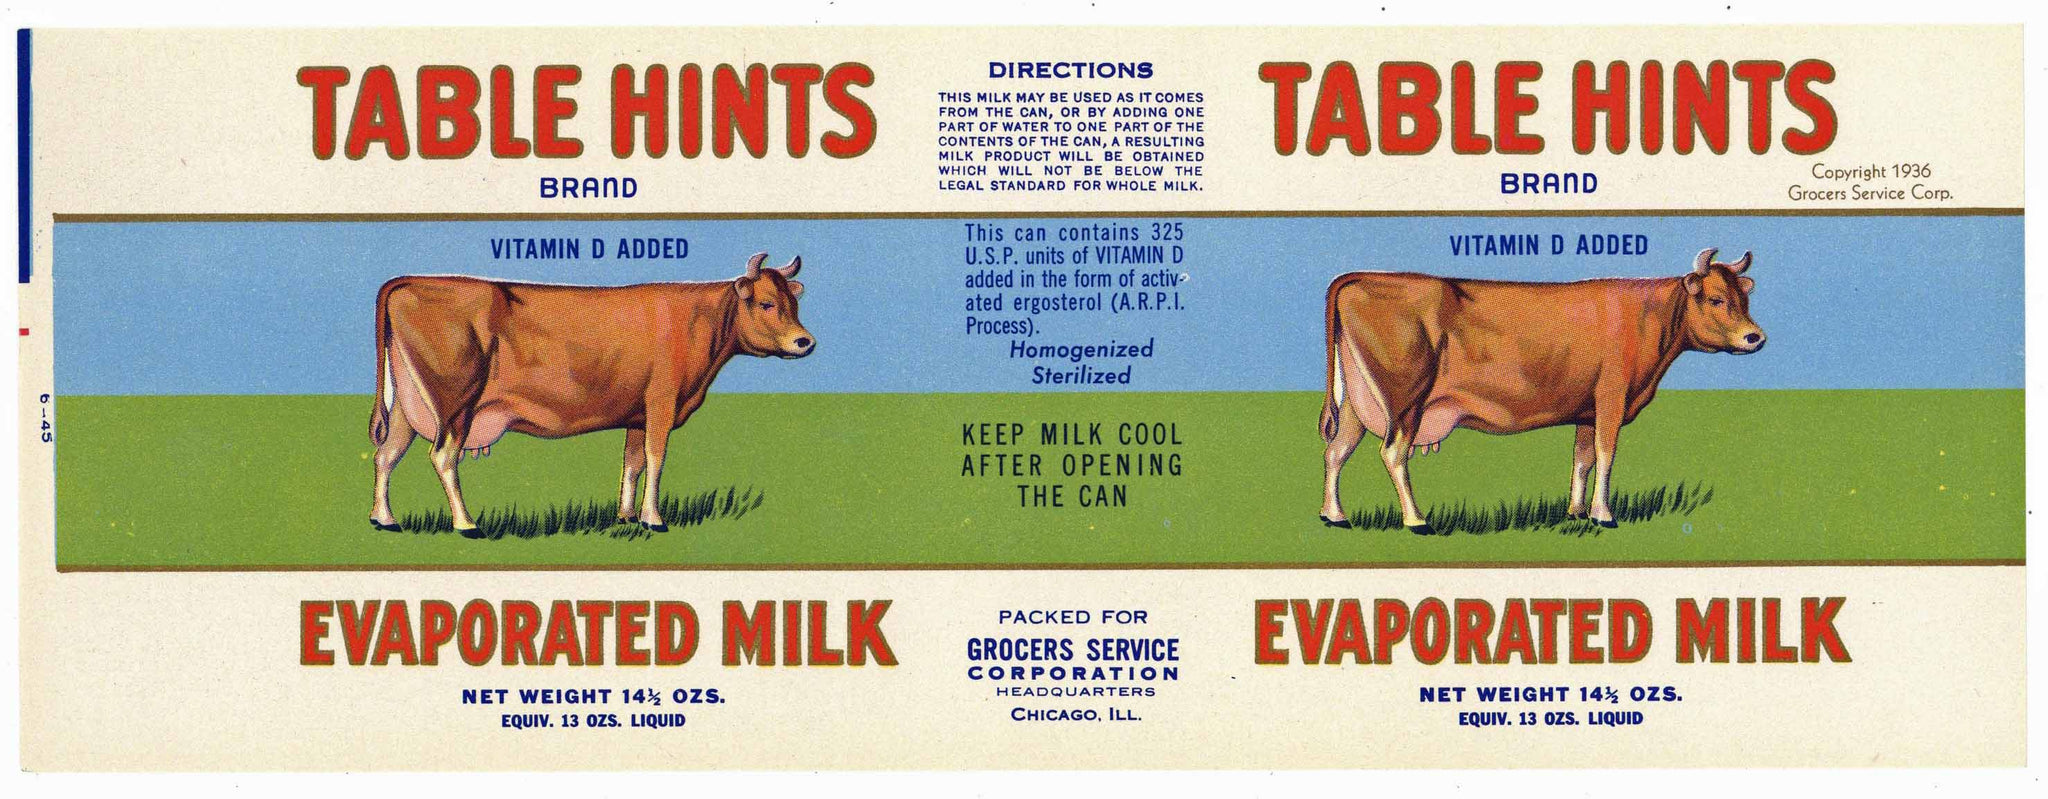 Table Hints Brand Vintage Evaporated Milk Can Label